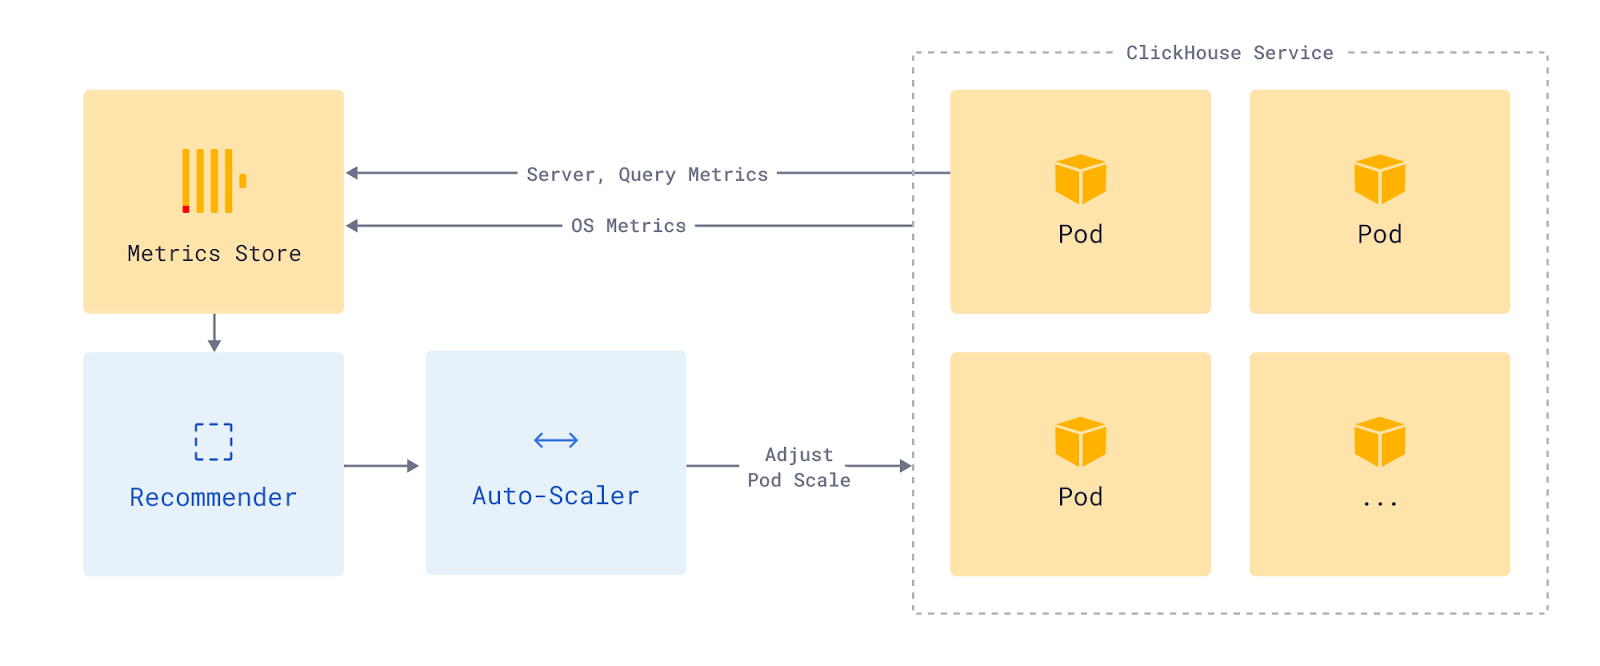 We are able to do away with some of the components required in Knative because our proxy is tightly integrated with our Kubernetes operators.